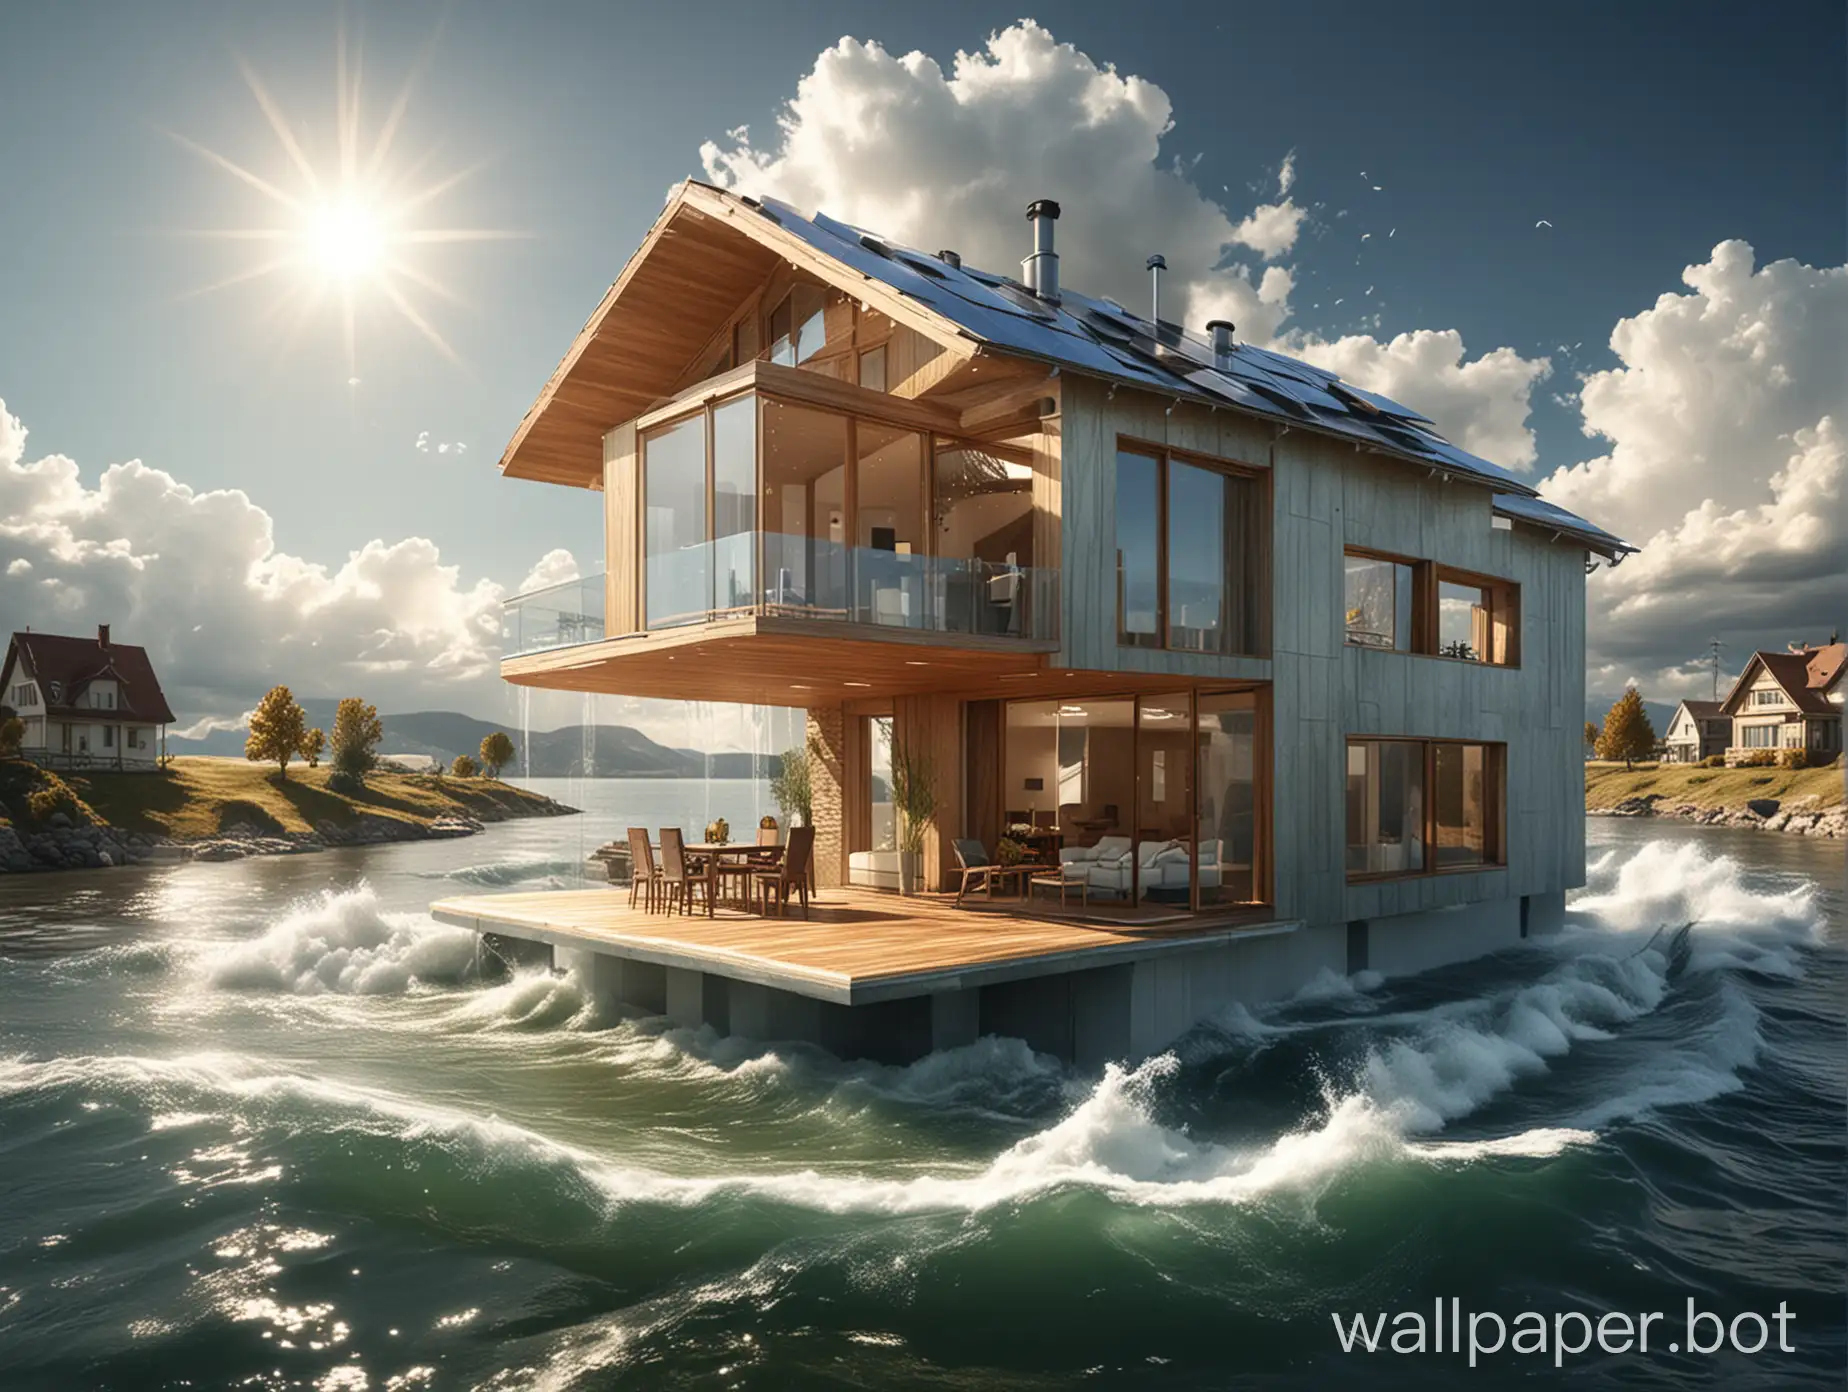 a house in the near future. Powered by the sun, wind and water. Present the house with a 3D cut, showing the buildings core. The picture is supposed to give you a feeling of a digitalized future